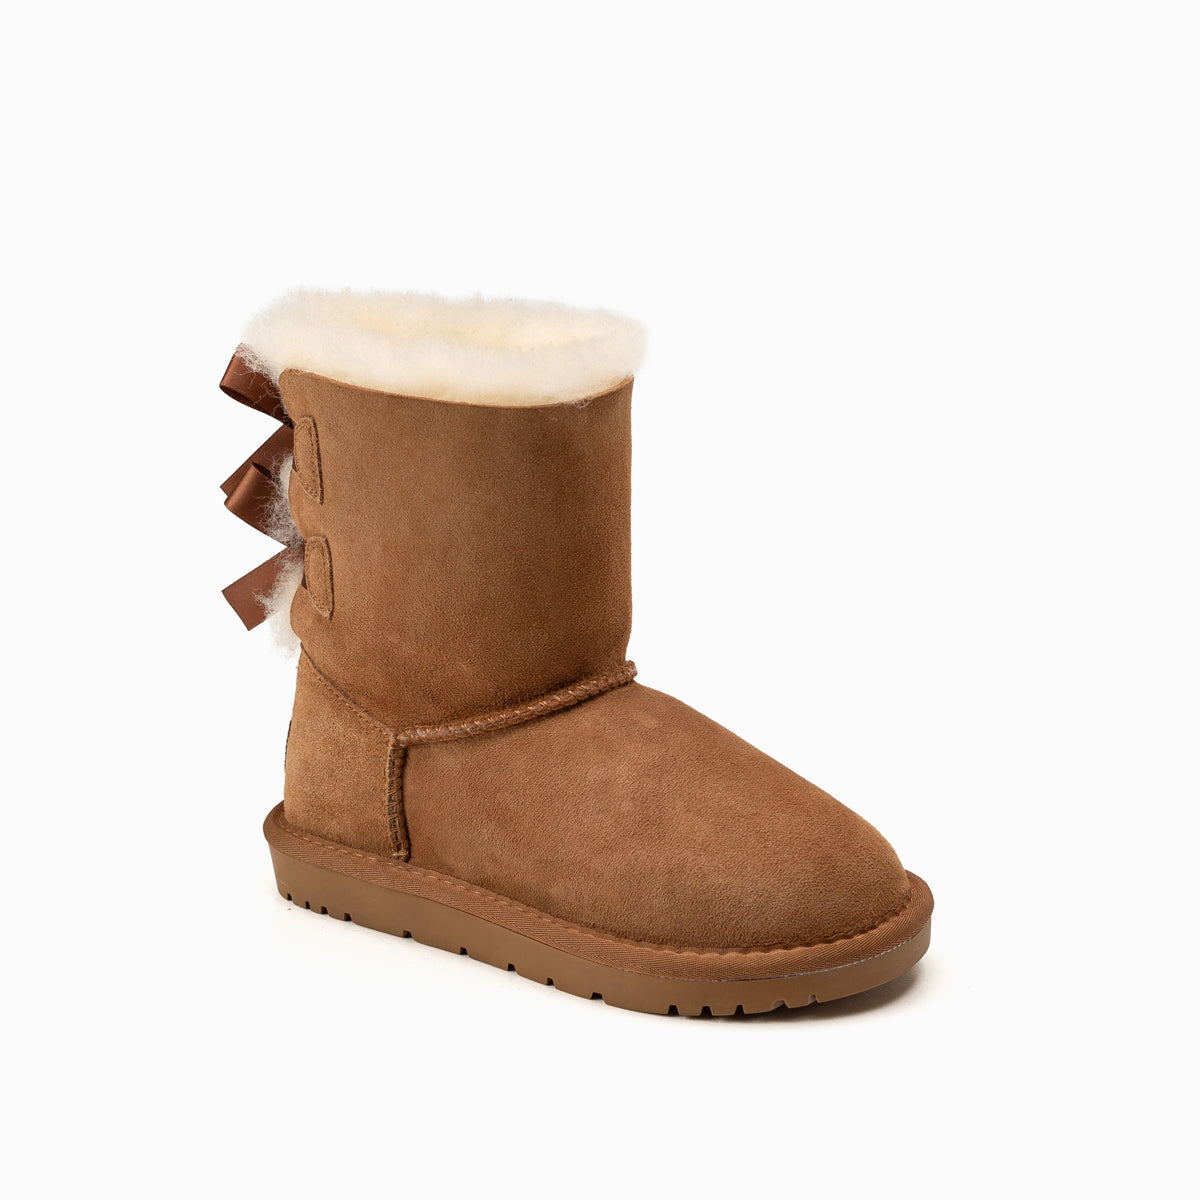 Ugg Kids 2 Ribbon Boots (Water Resistant)